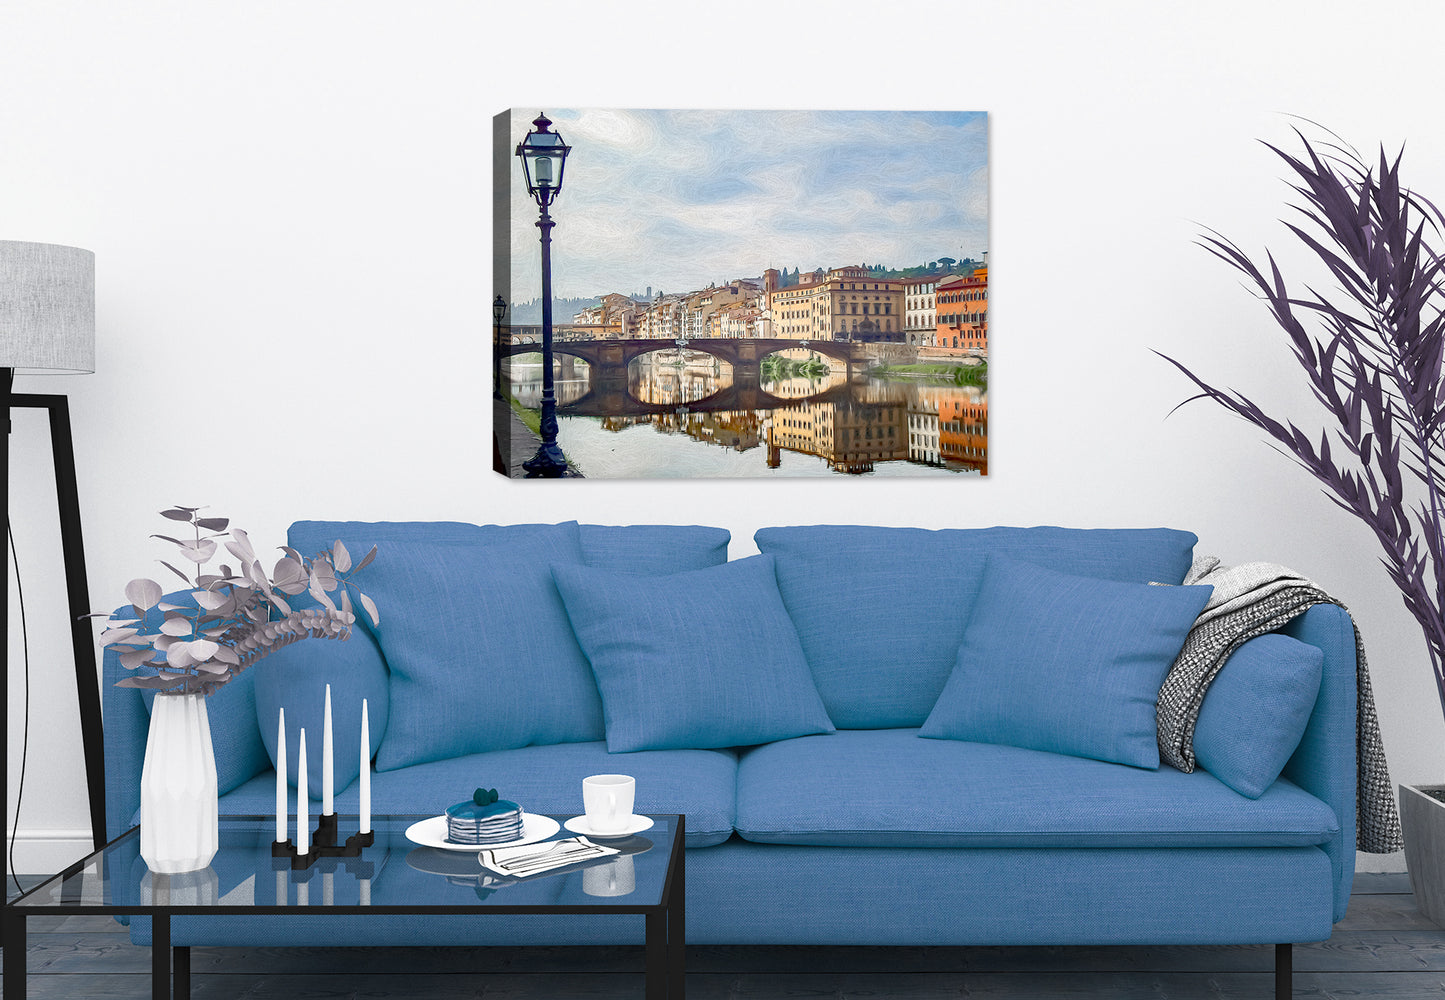 Ancient Bridge over the Water - Fine Art Painting